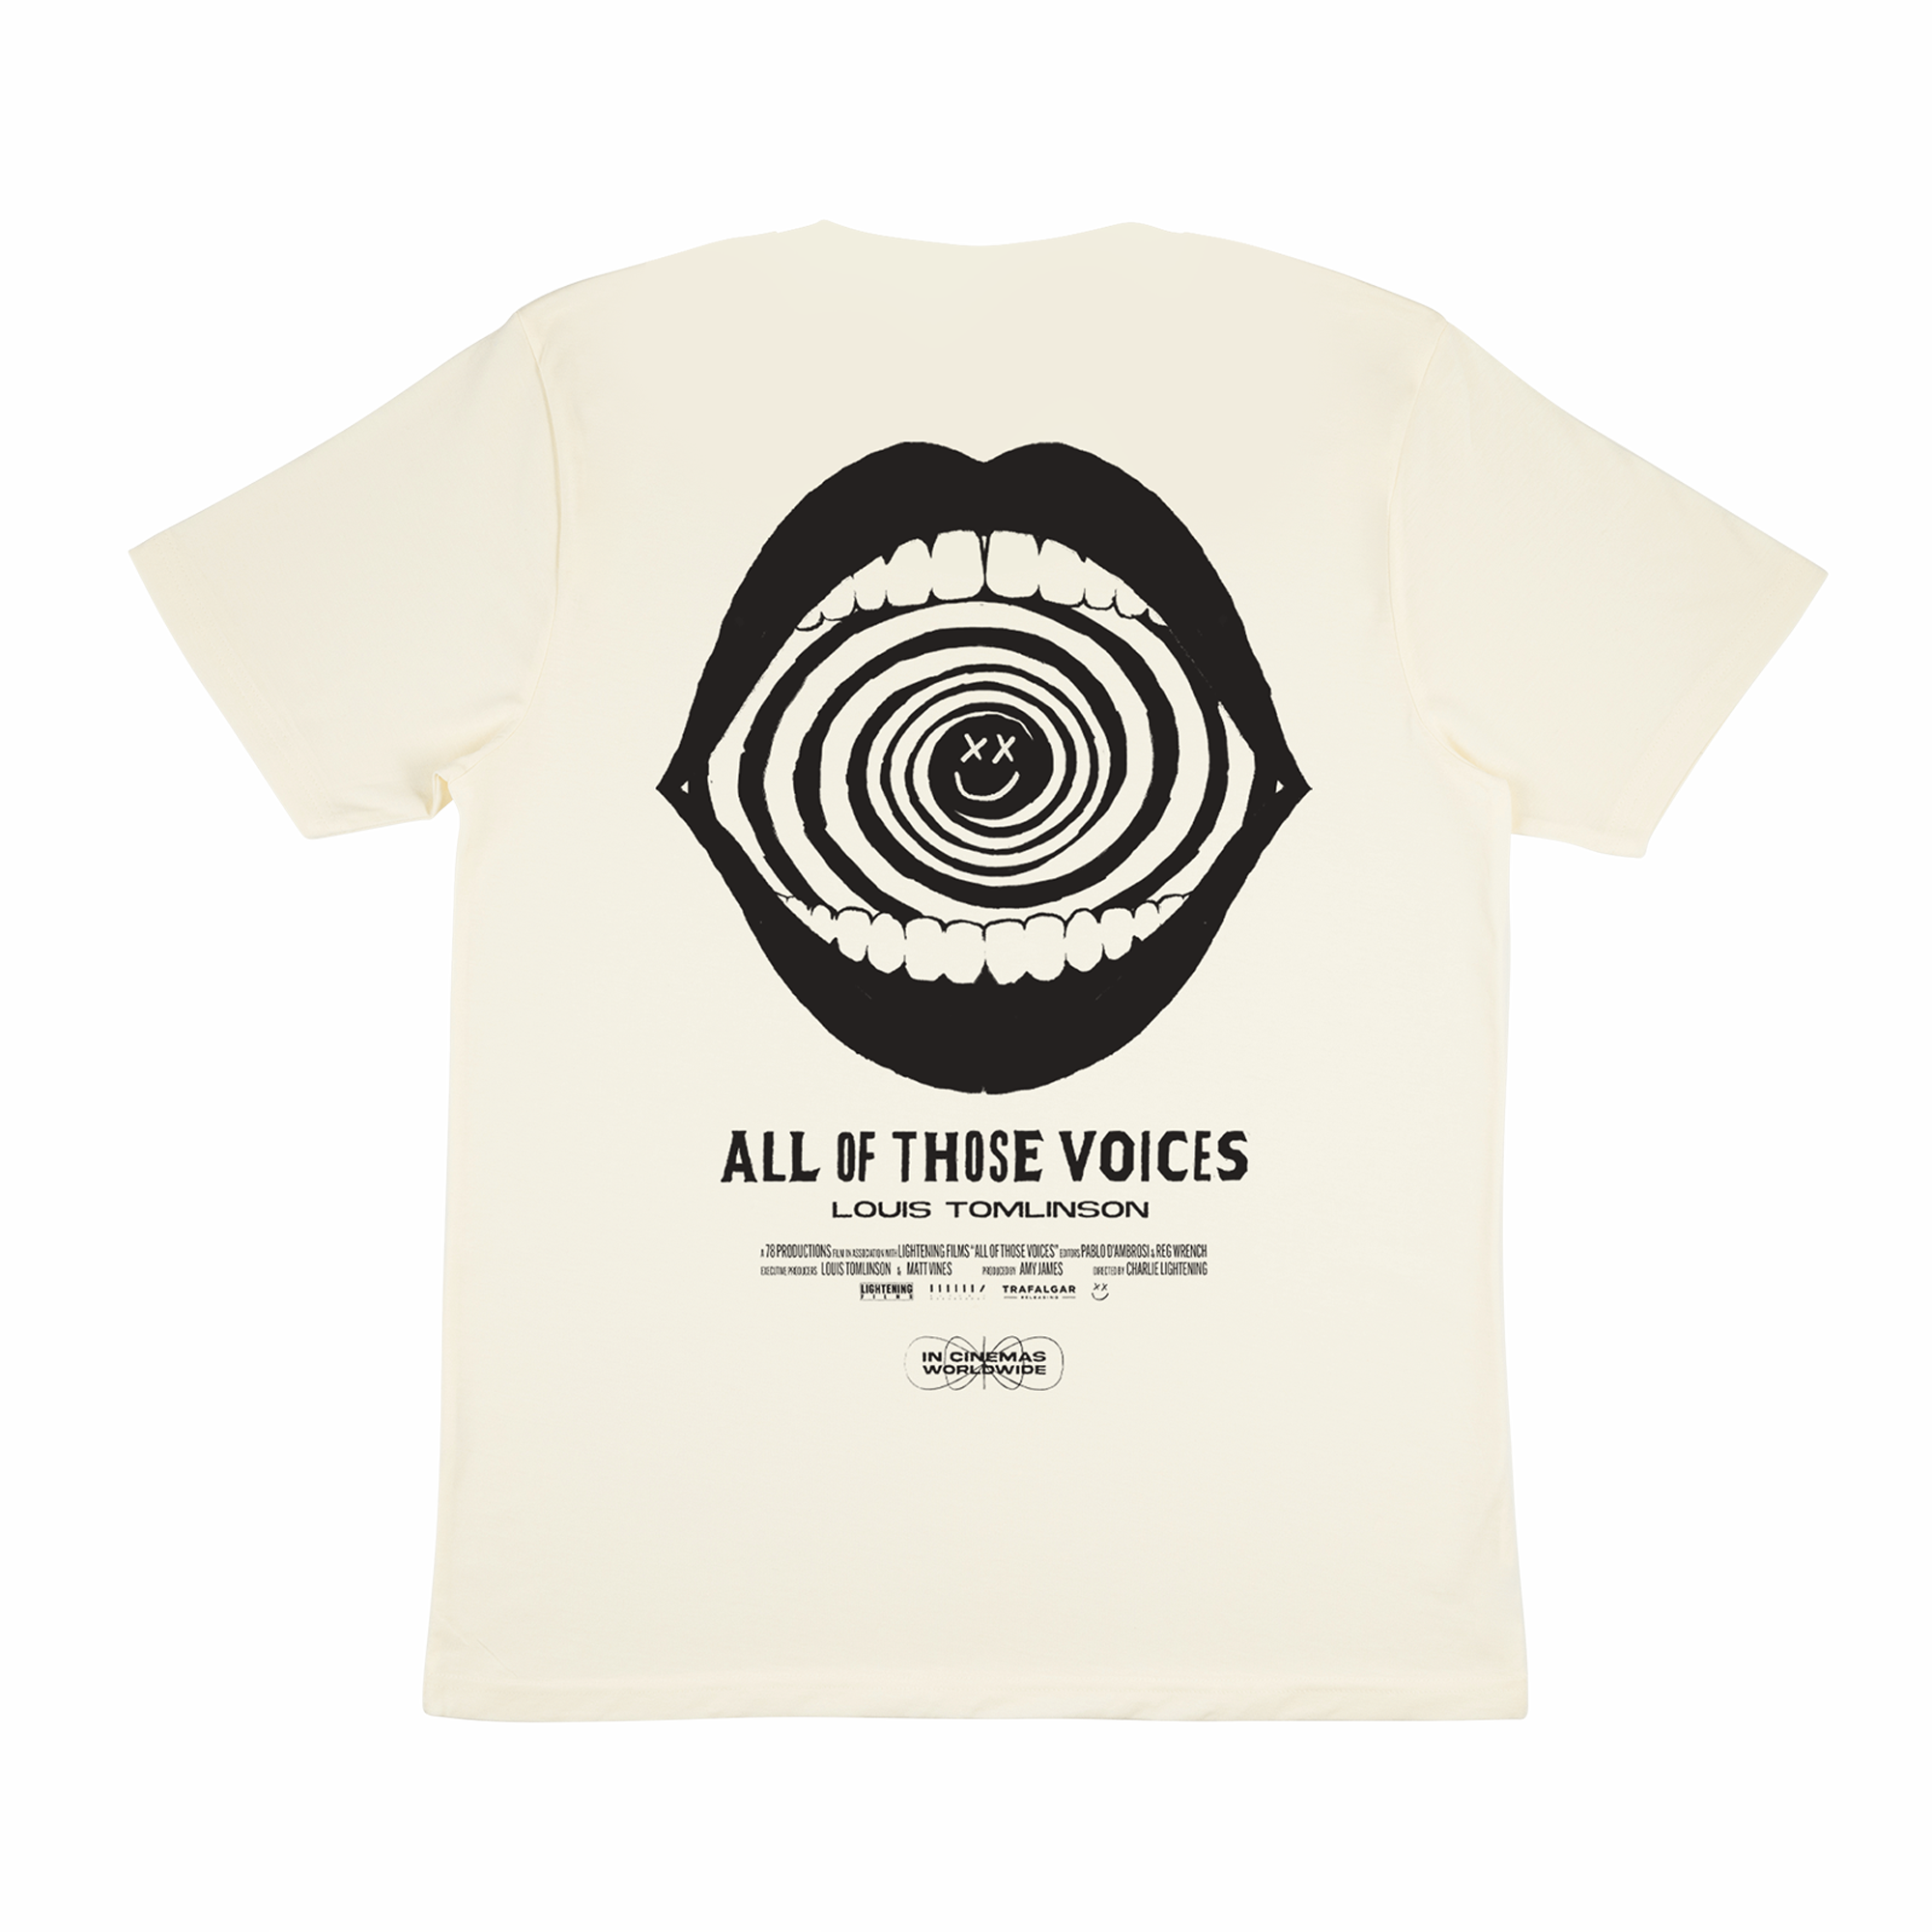 Louis Tomlinson All Of Those Voices T Shirt Louis Tomlinson Merch